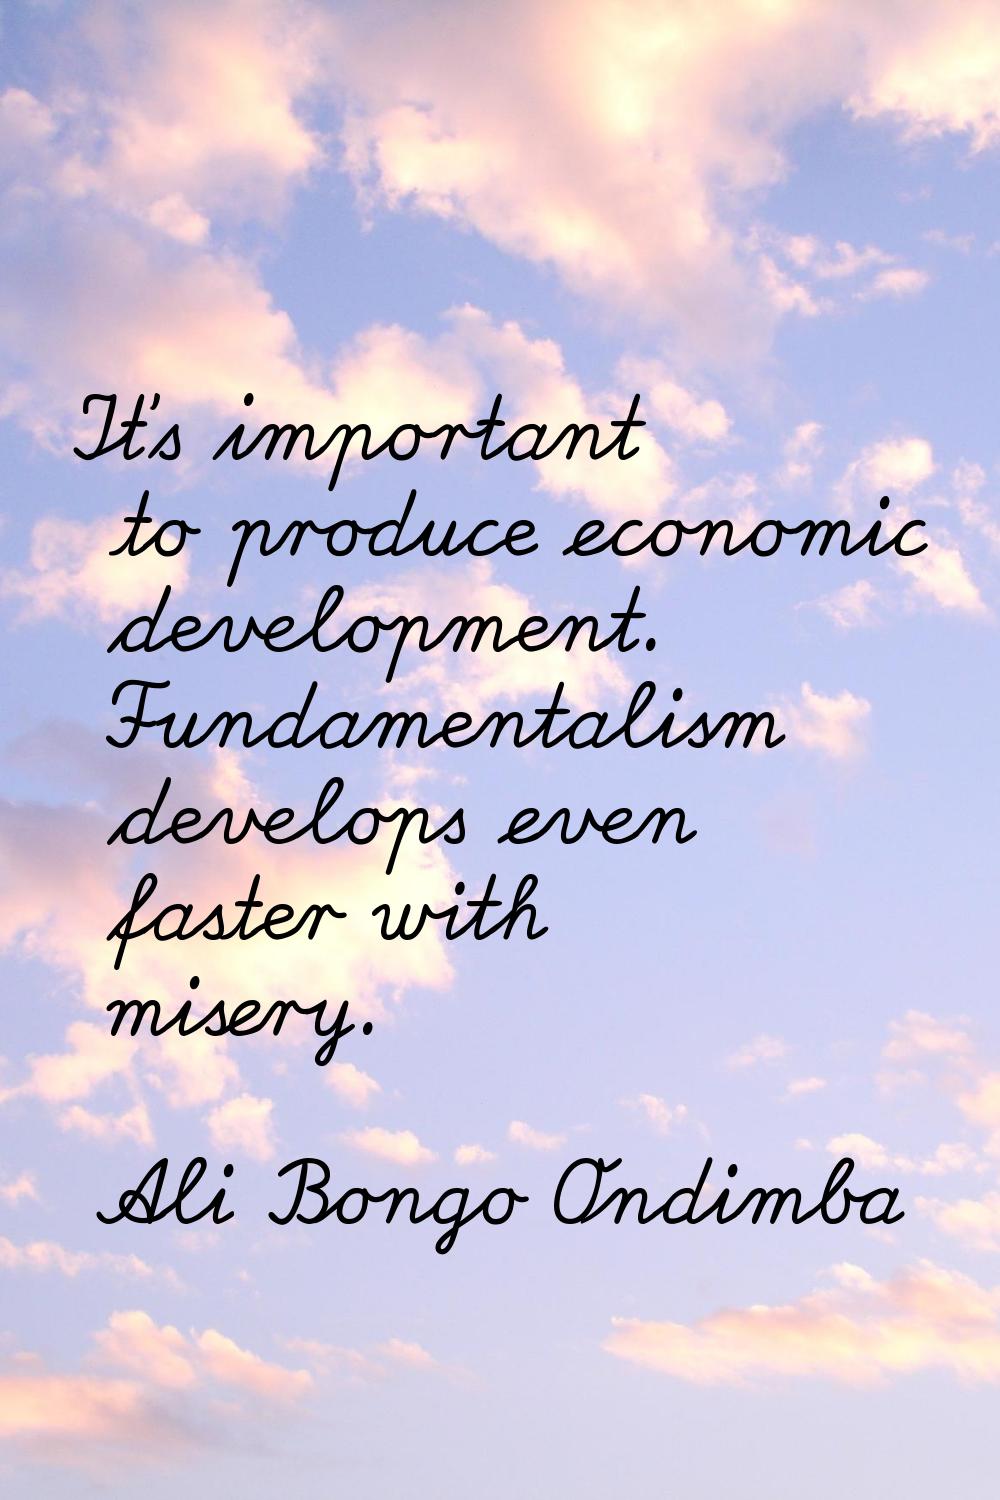 It's important to produce economic development. Fundamentalism develops even faster with misery.